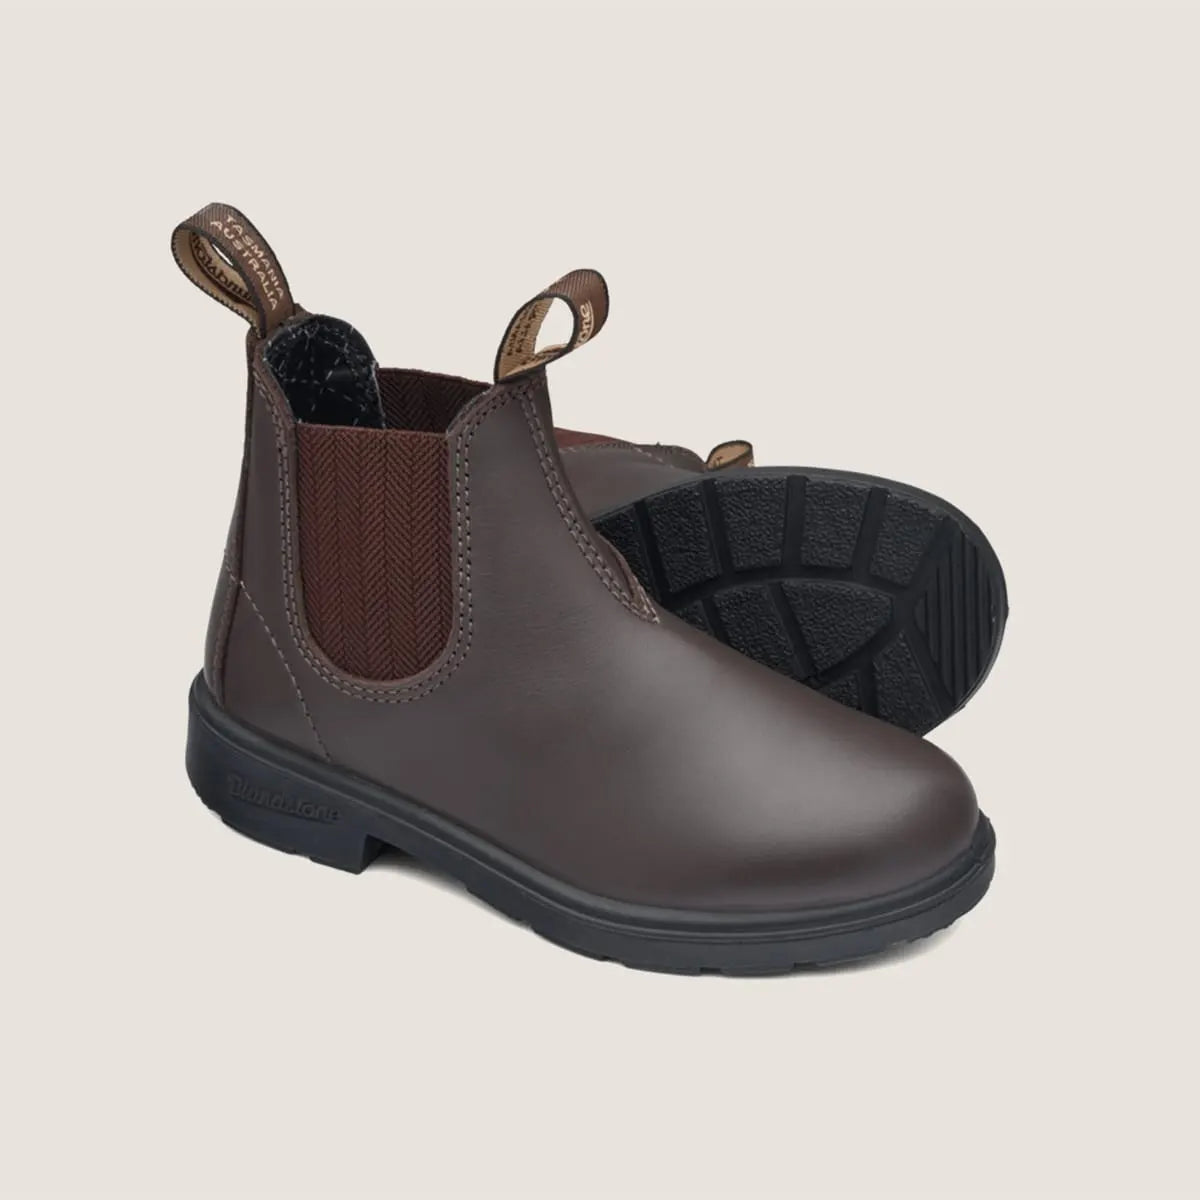 Blundstone 630 Elastic Sided Kids Boots in Brown